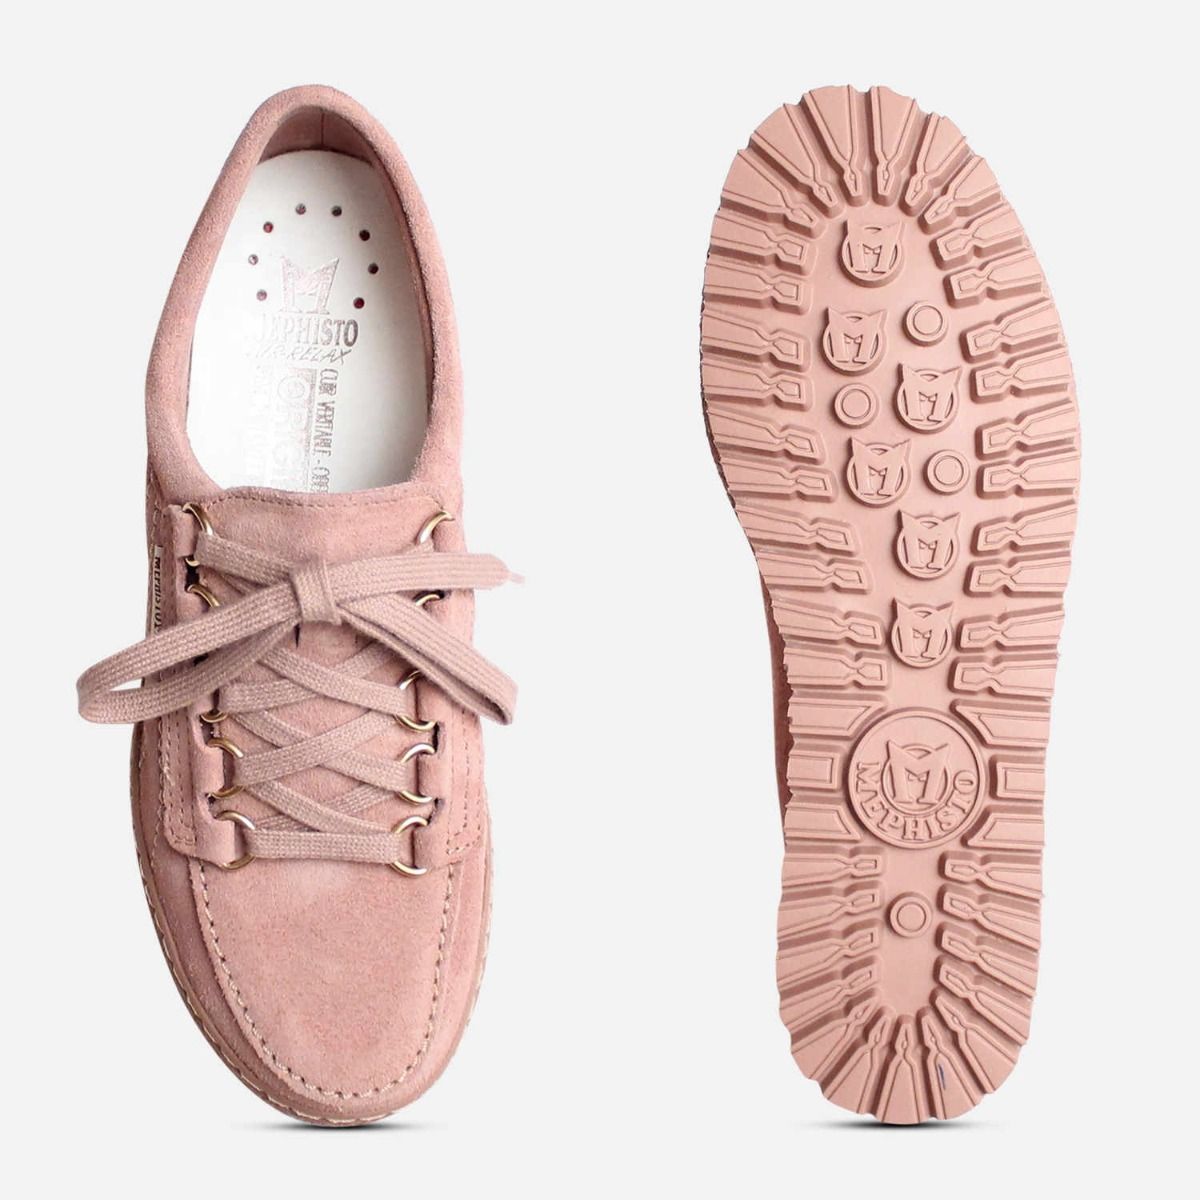 Mephisto Lady Shoes in Pastel Pink Suede Leather